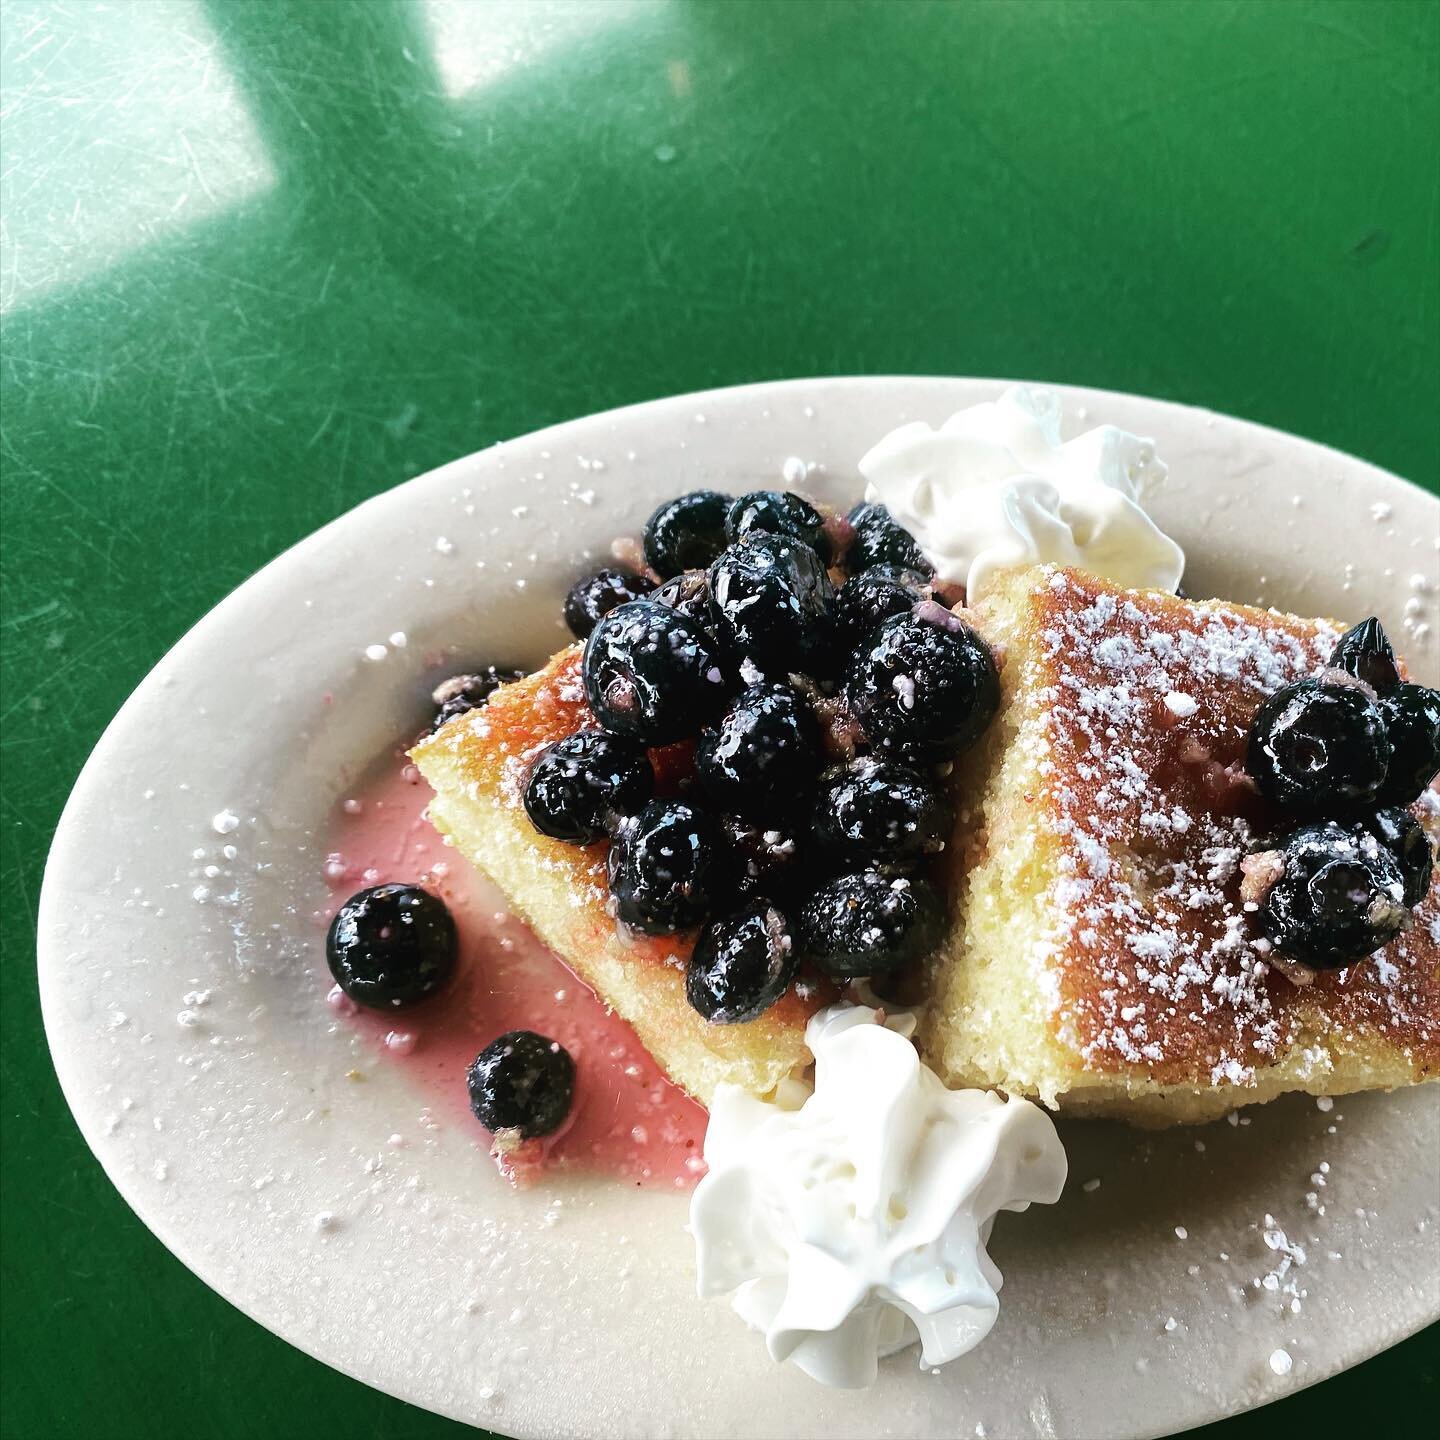 Grand Marnier soaked cornbread with fresh blue berries on special this weekend